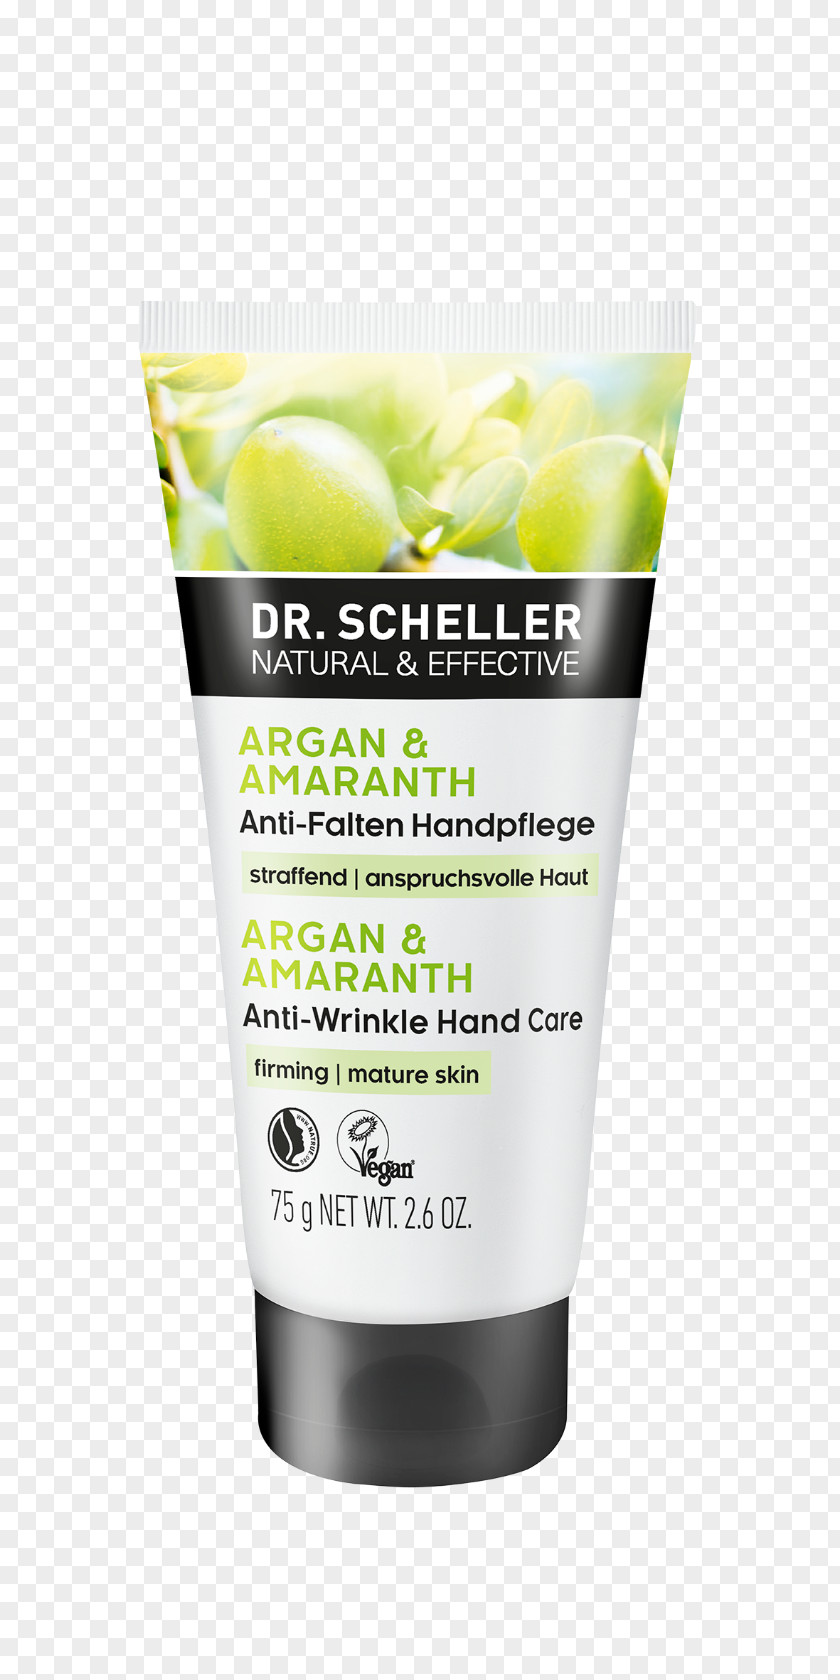 Argan Oil Cream Dr. Scheller Oill & Amaranth Anti-Wrinkle Intensive Serum Lotion Product PNG